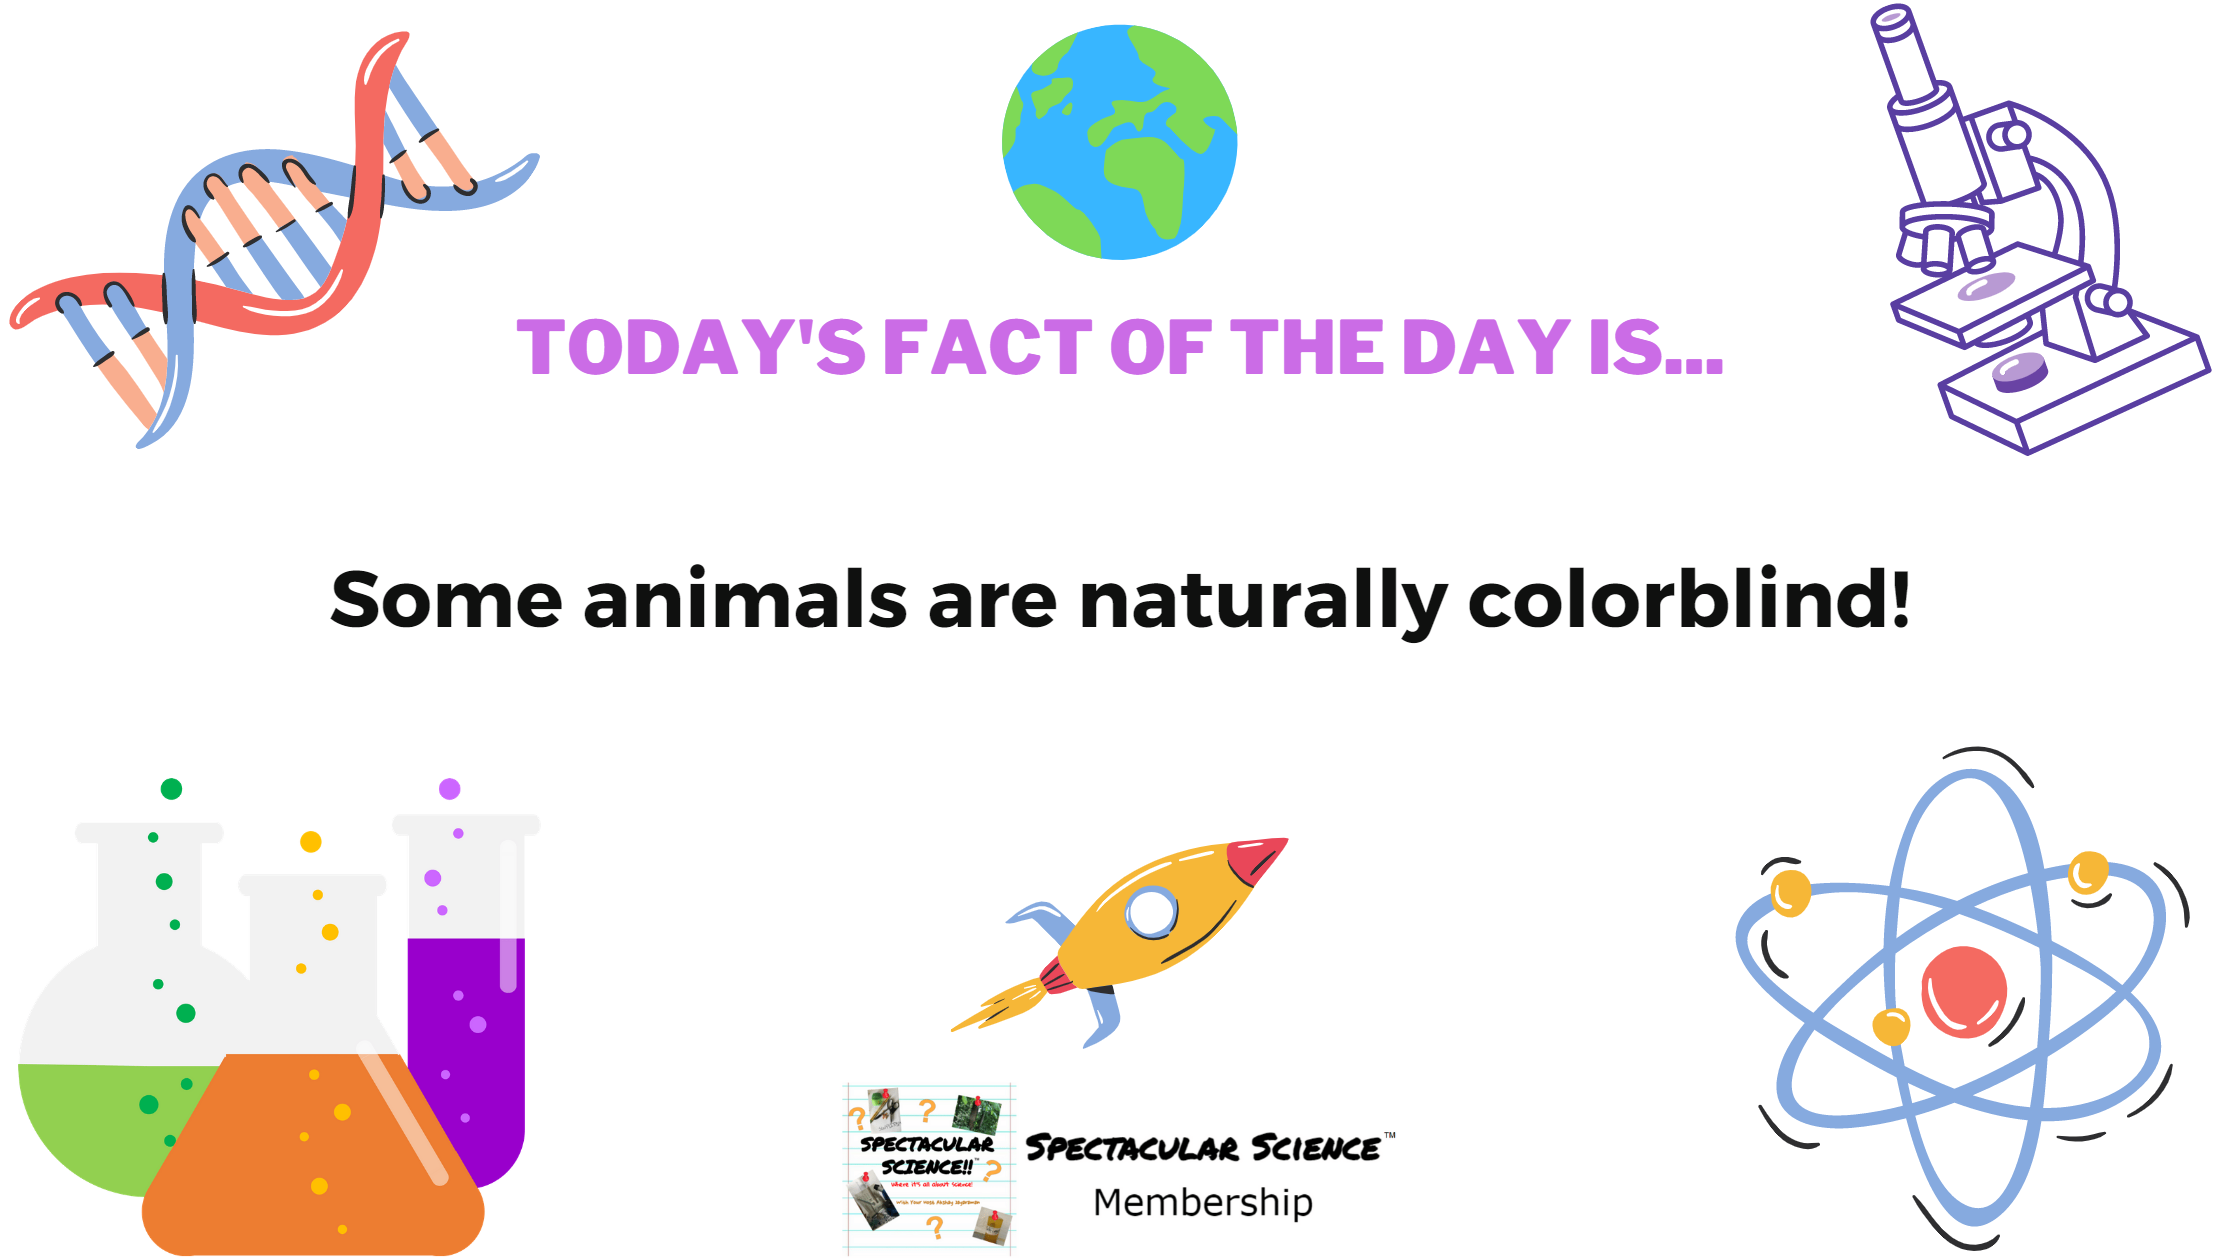 Fact of the Day Image January 20th